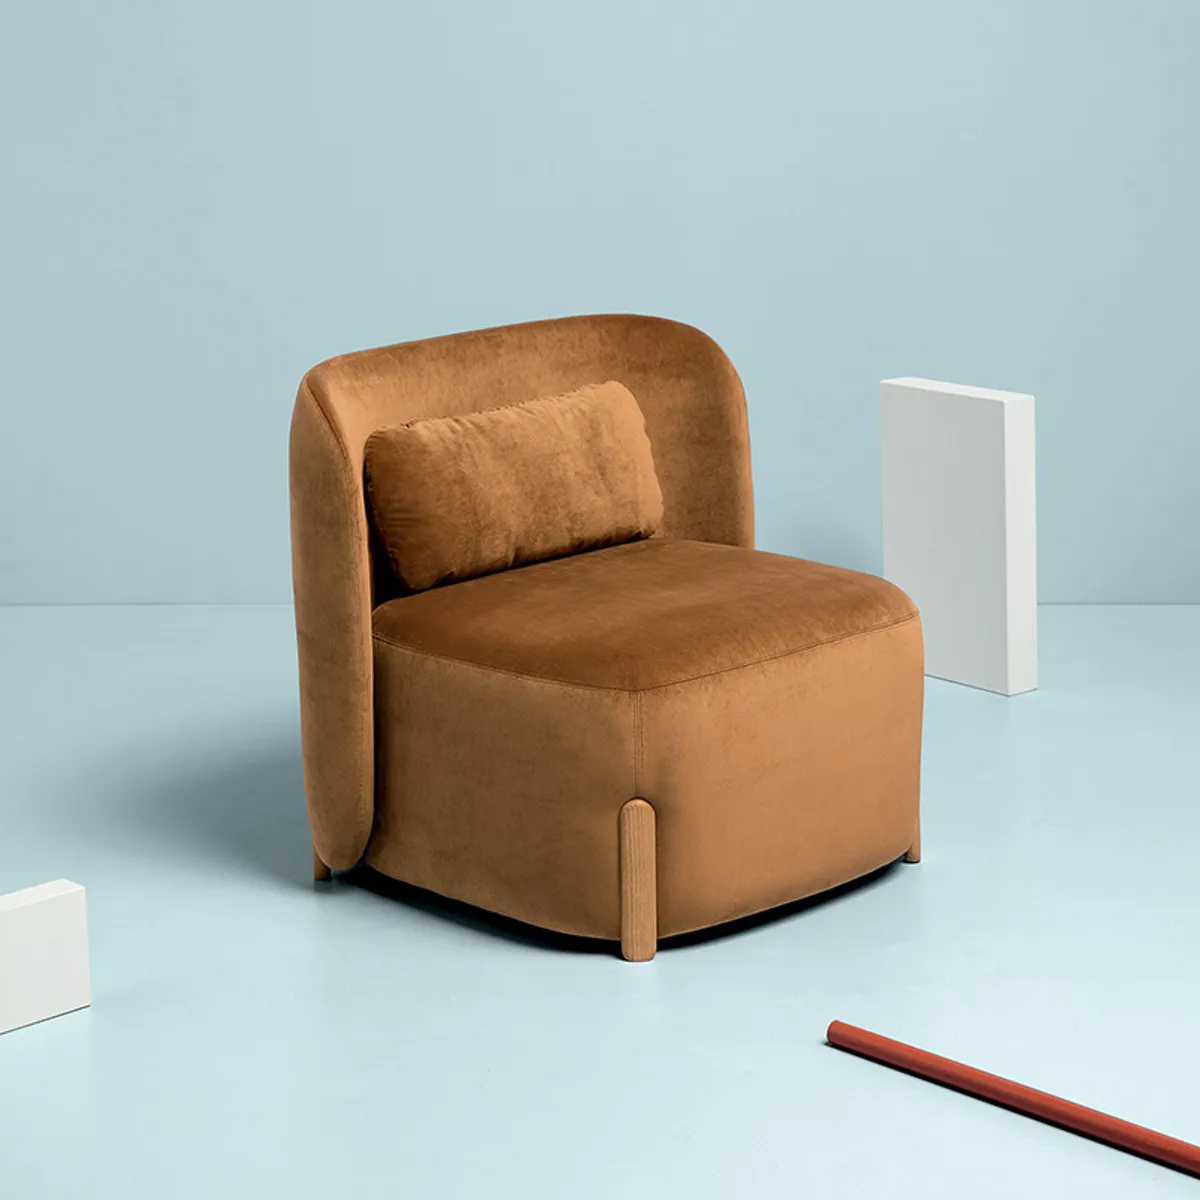 Hyppo Lounge Chair Situ Inside Out Contracts